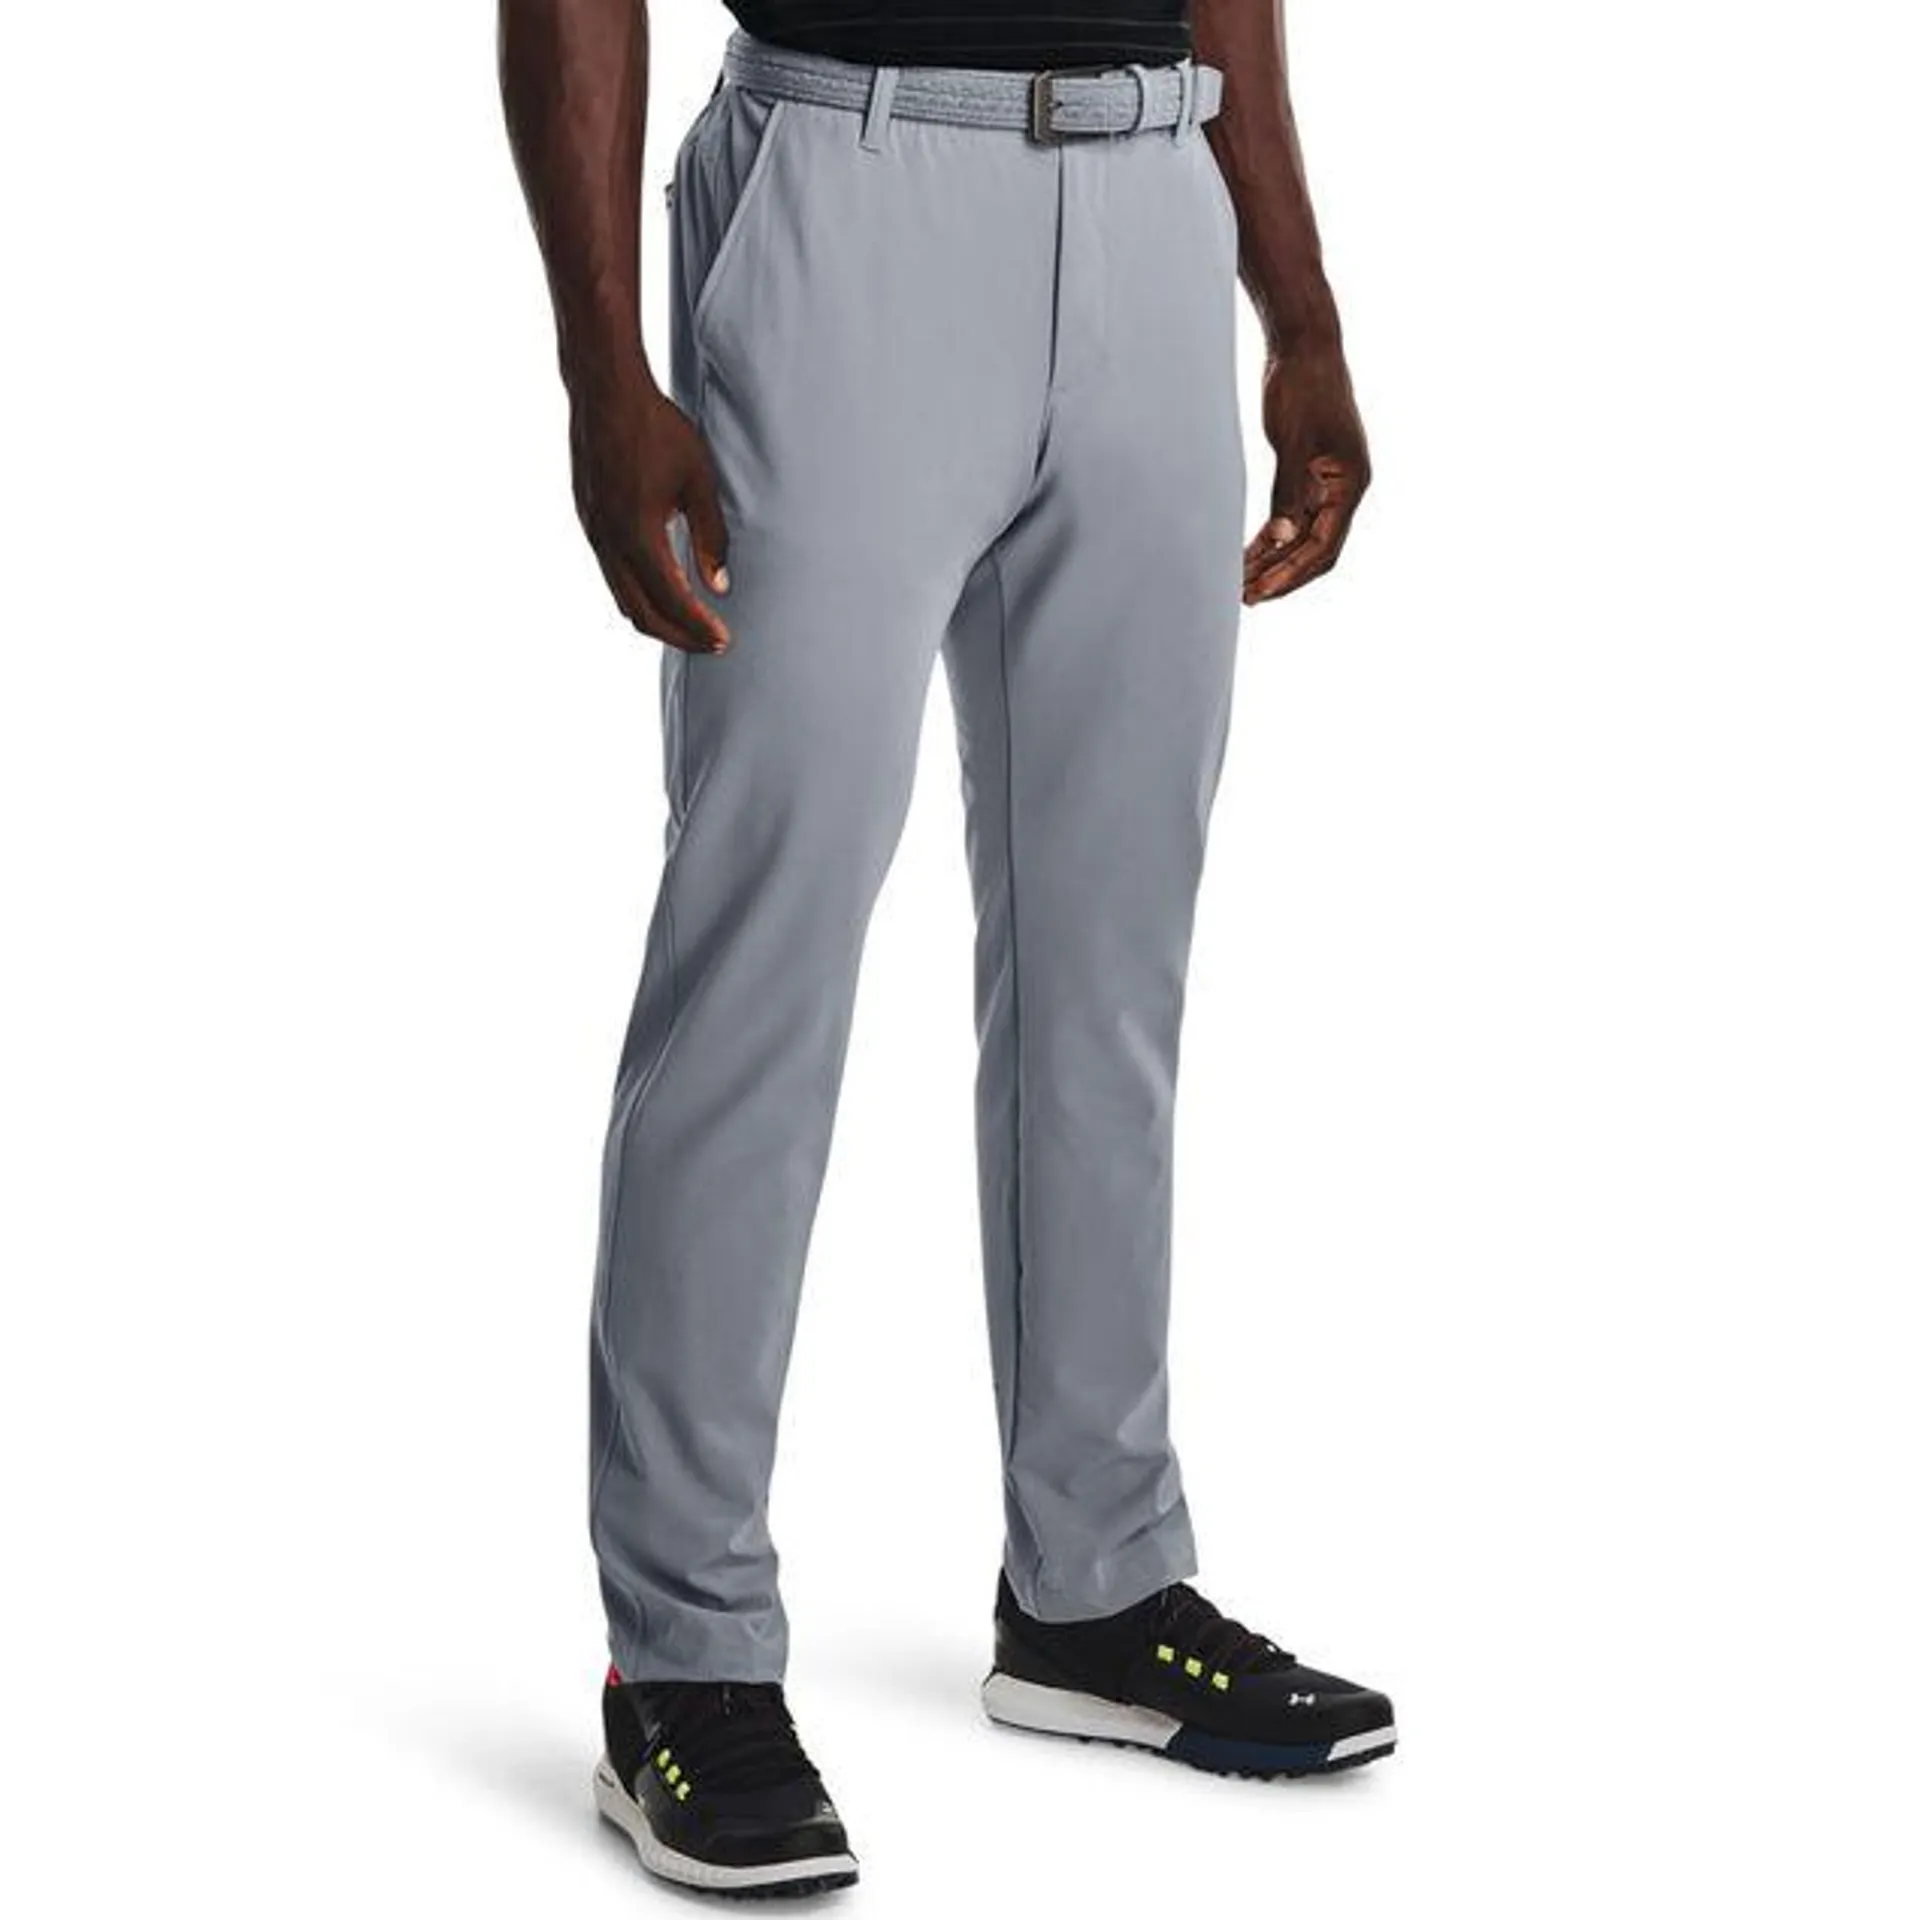 Under Armour Men's Drive Tapered Golf Trousers